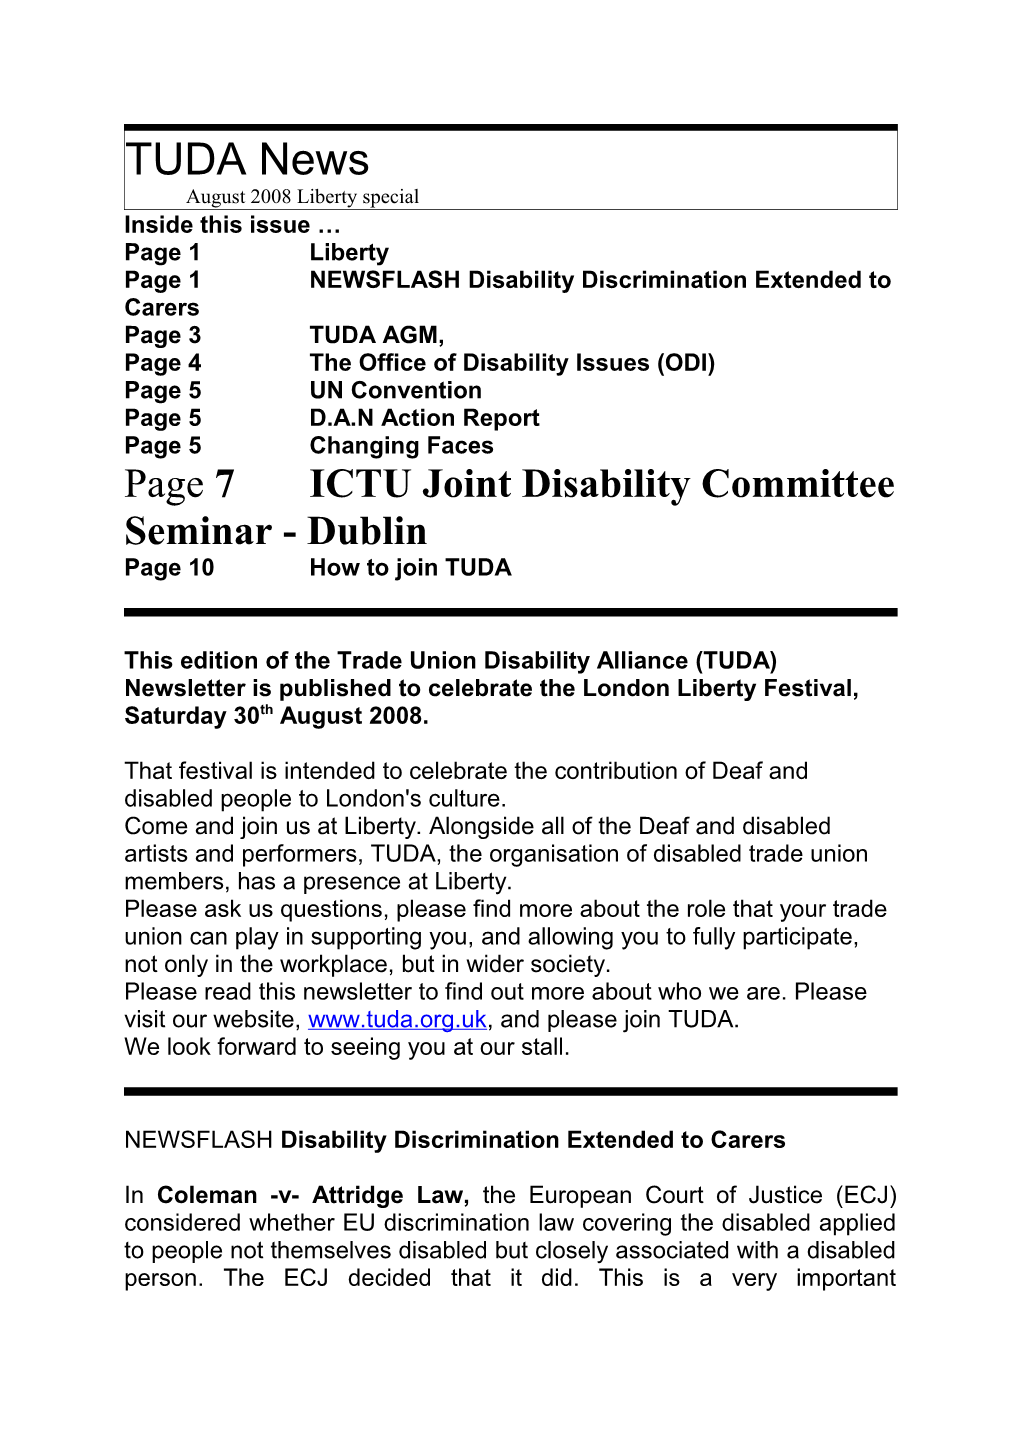 Page 1NEWSFLASH Disability Discrimination Extended to Carers